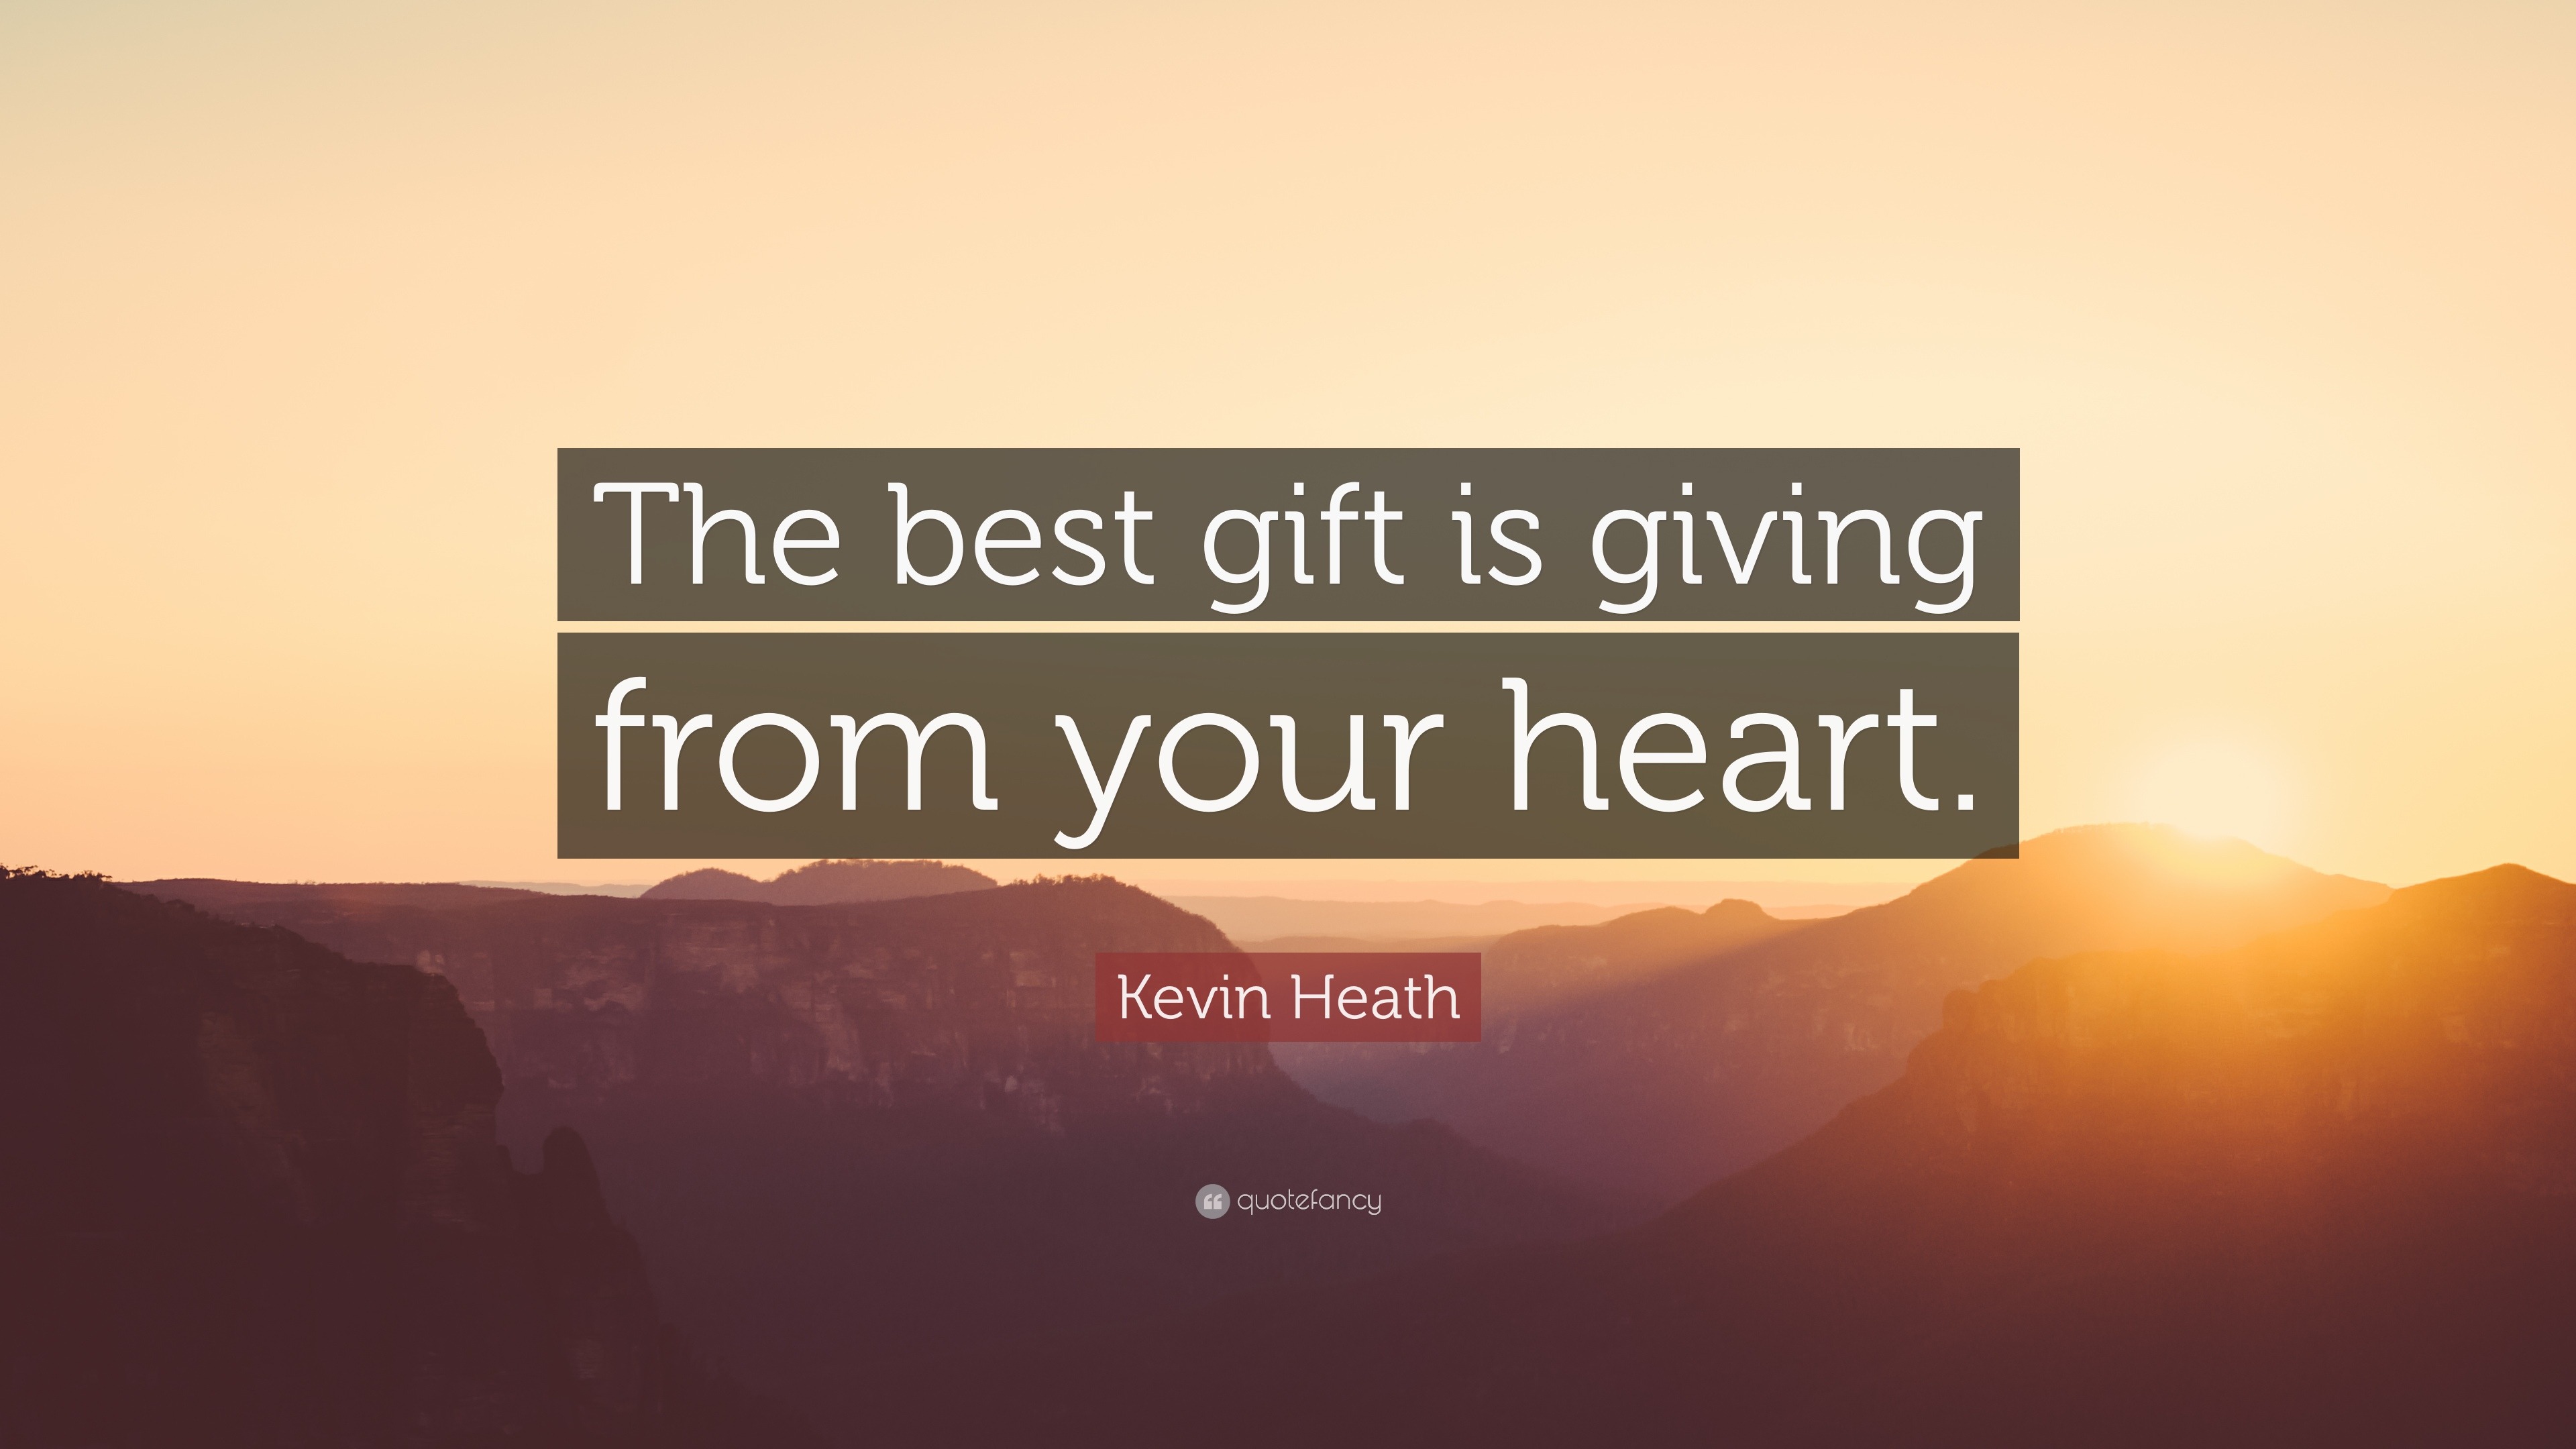 Quotes and Sayings - SearchQuotes | Gift quotes, Giving quotes, Gifts